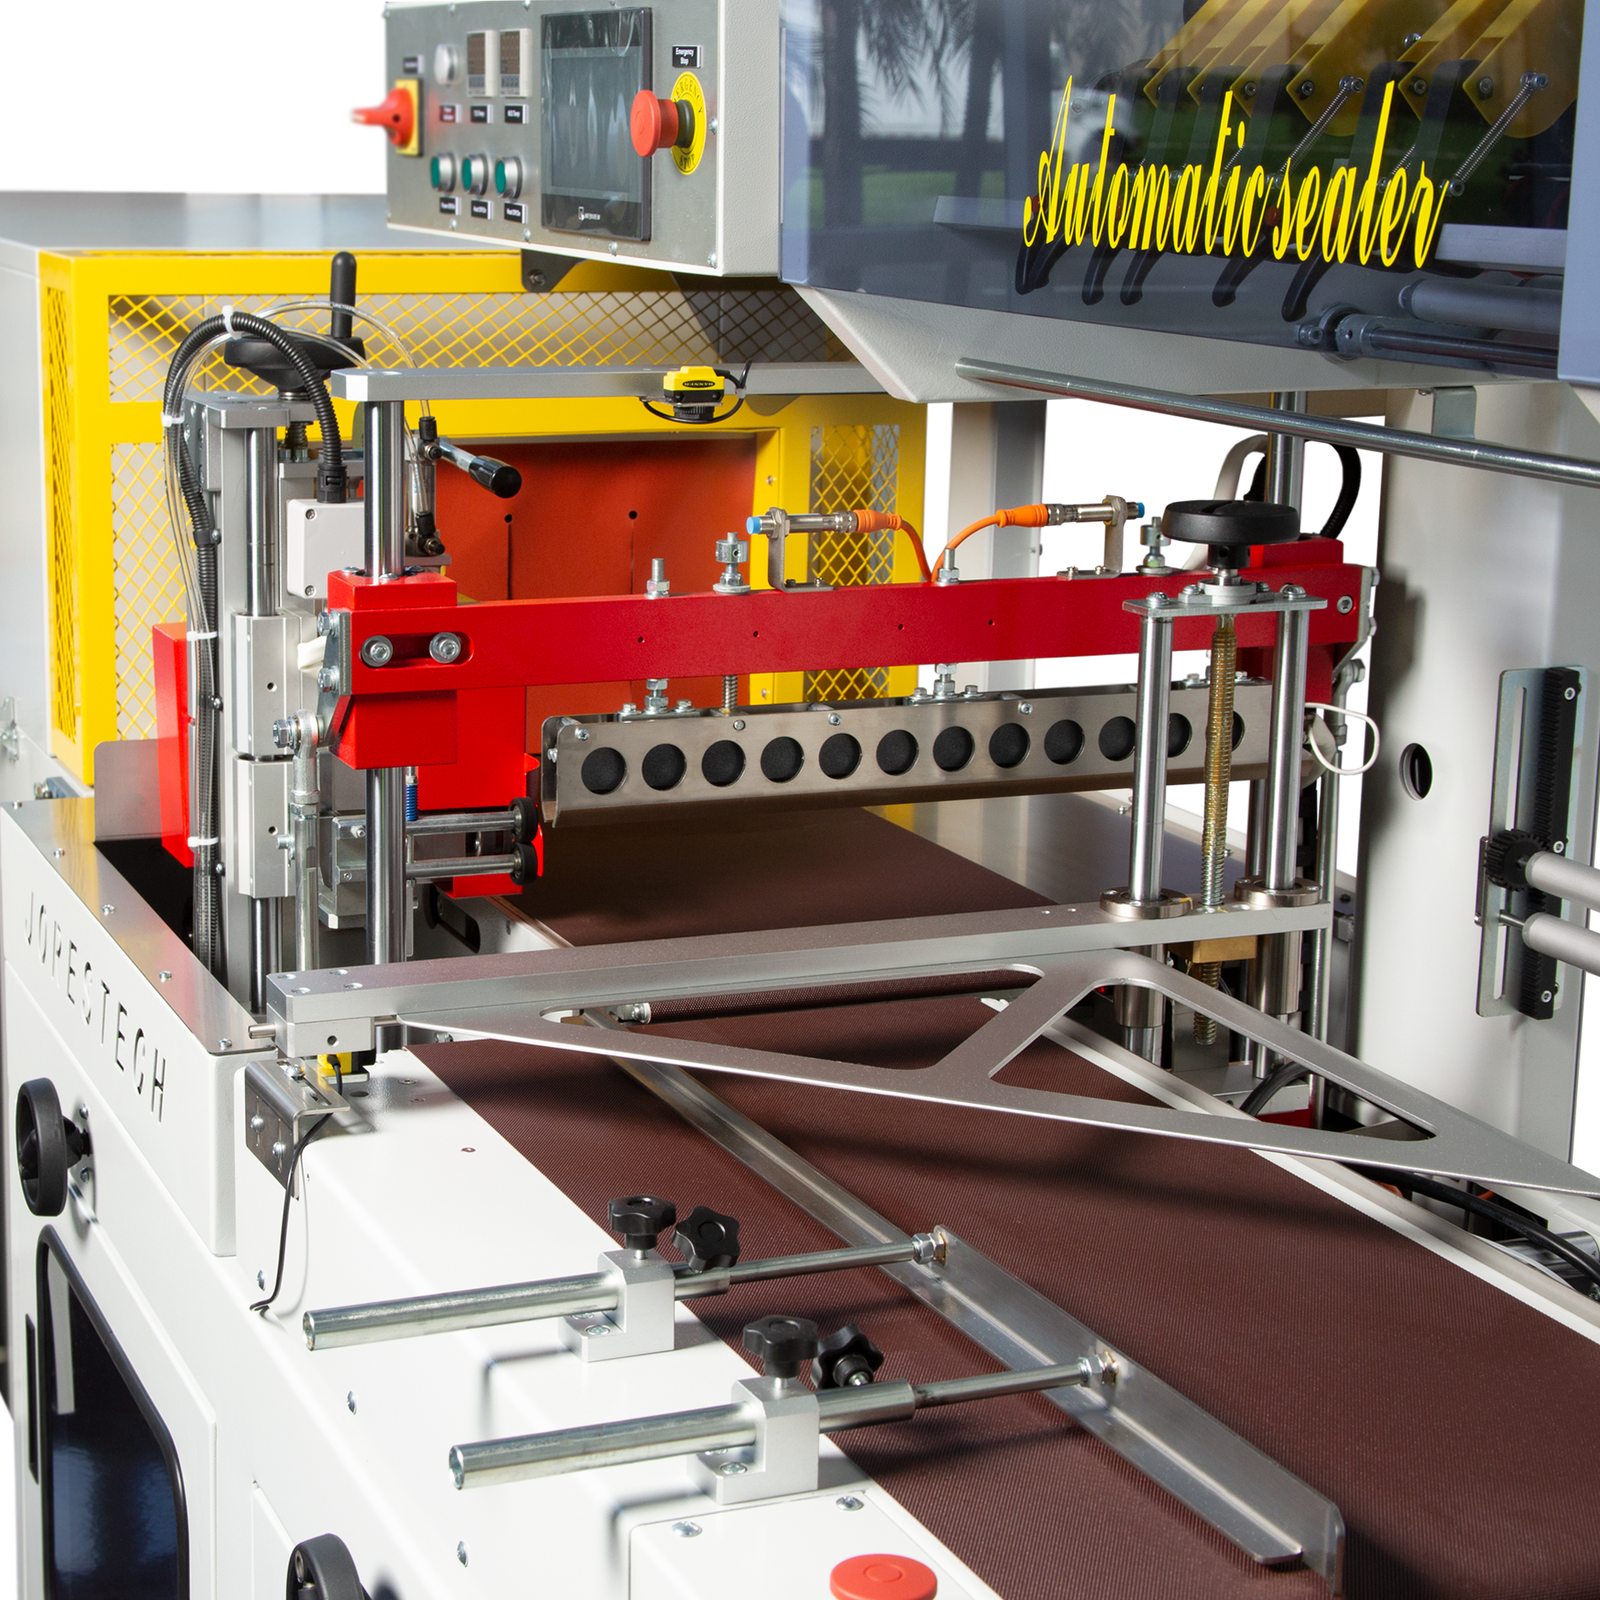 Detail shows, the entry conveyor, the pneumatic seal mechanism, the control panel, of the side sealer and the entry of the shrink tunnel positioned at the end of the side sealer.